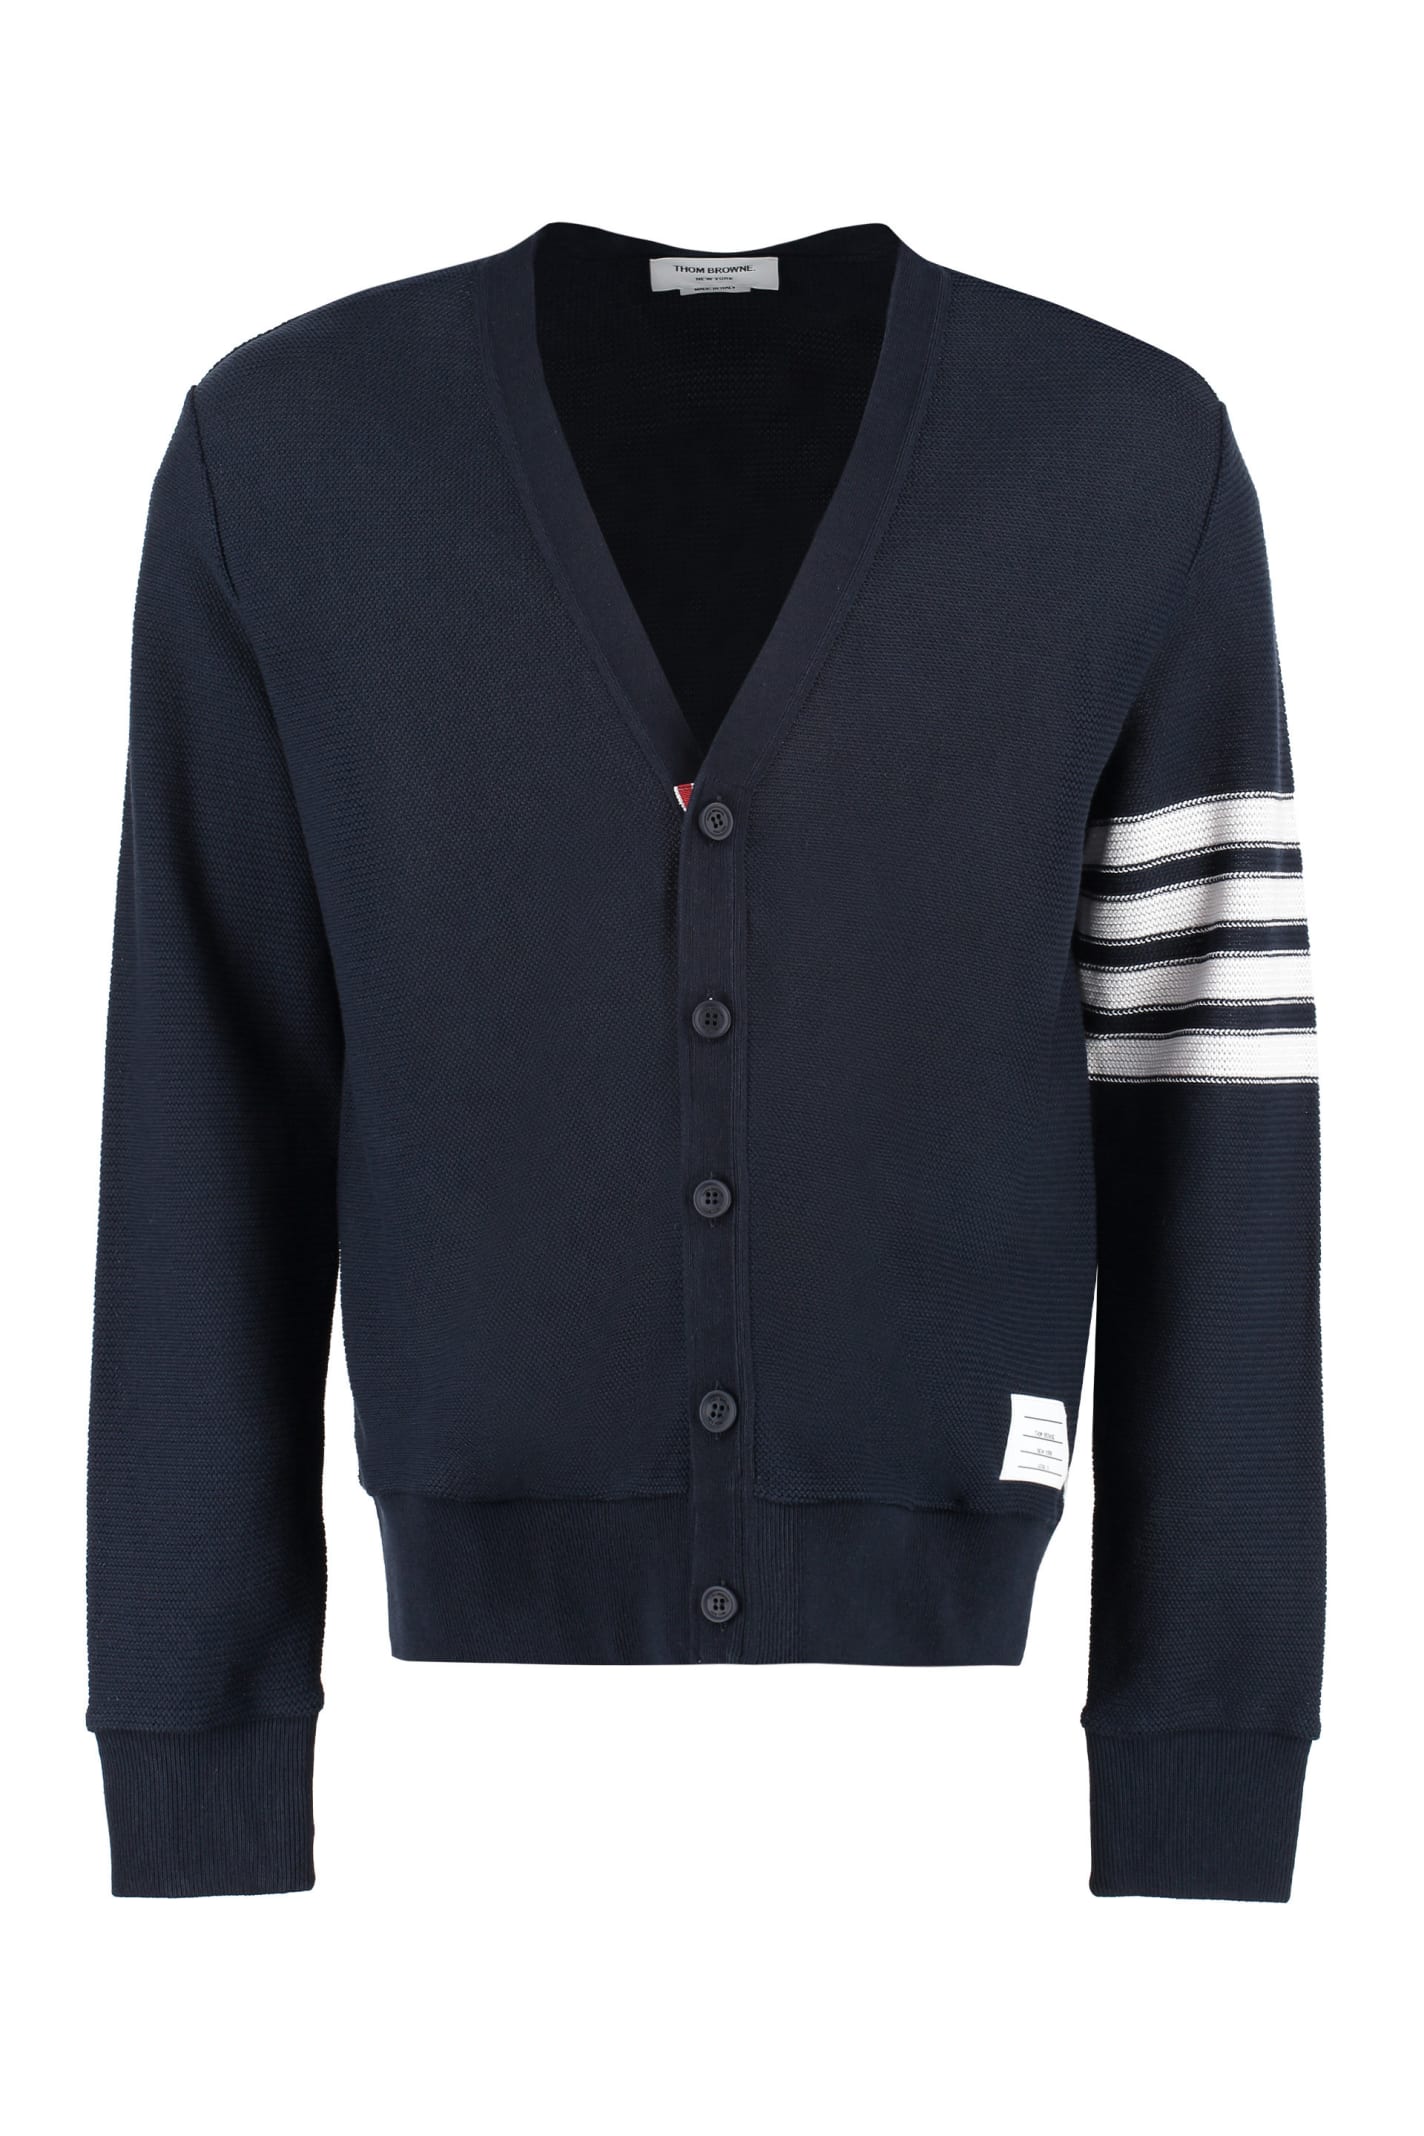 Thom Browne Buttoned Cotton Cardigan